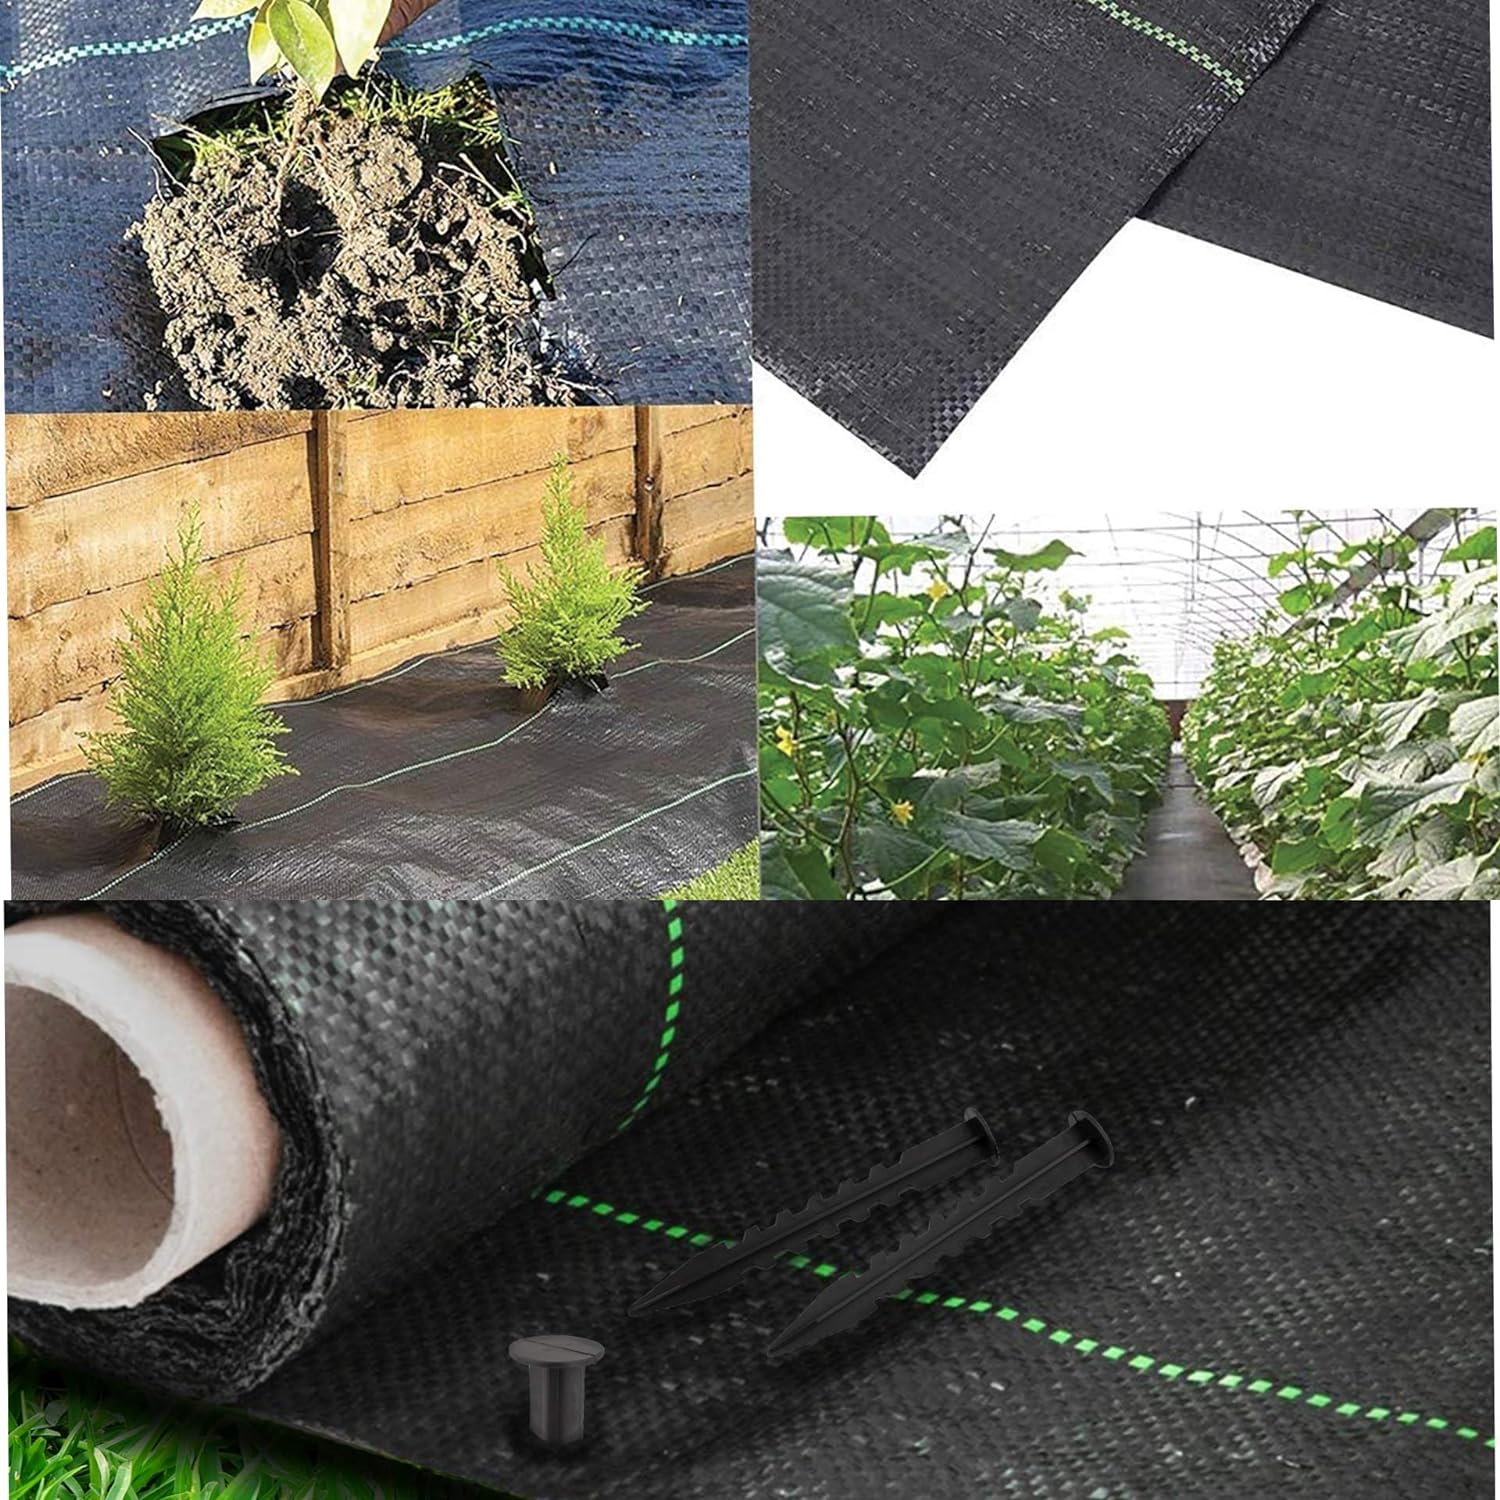 ADEPTNA Heavy Duty Garden Weed Control Fabric Membrane Made from Strong 100g/m² fabric with 50 Securing pegs - Ideal for use in Patios Garden Landscaping (2 X 10M + 50 PEGS)